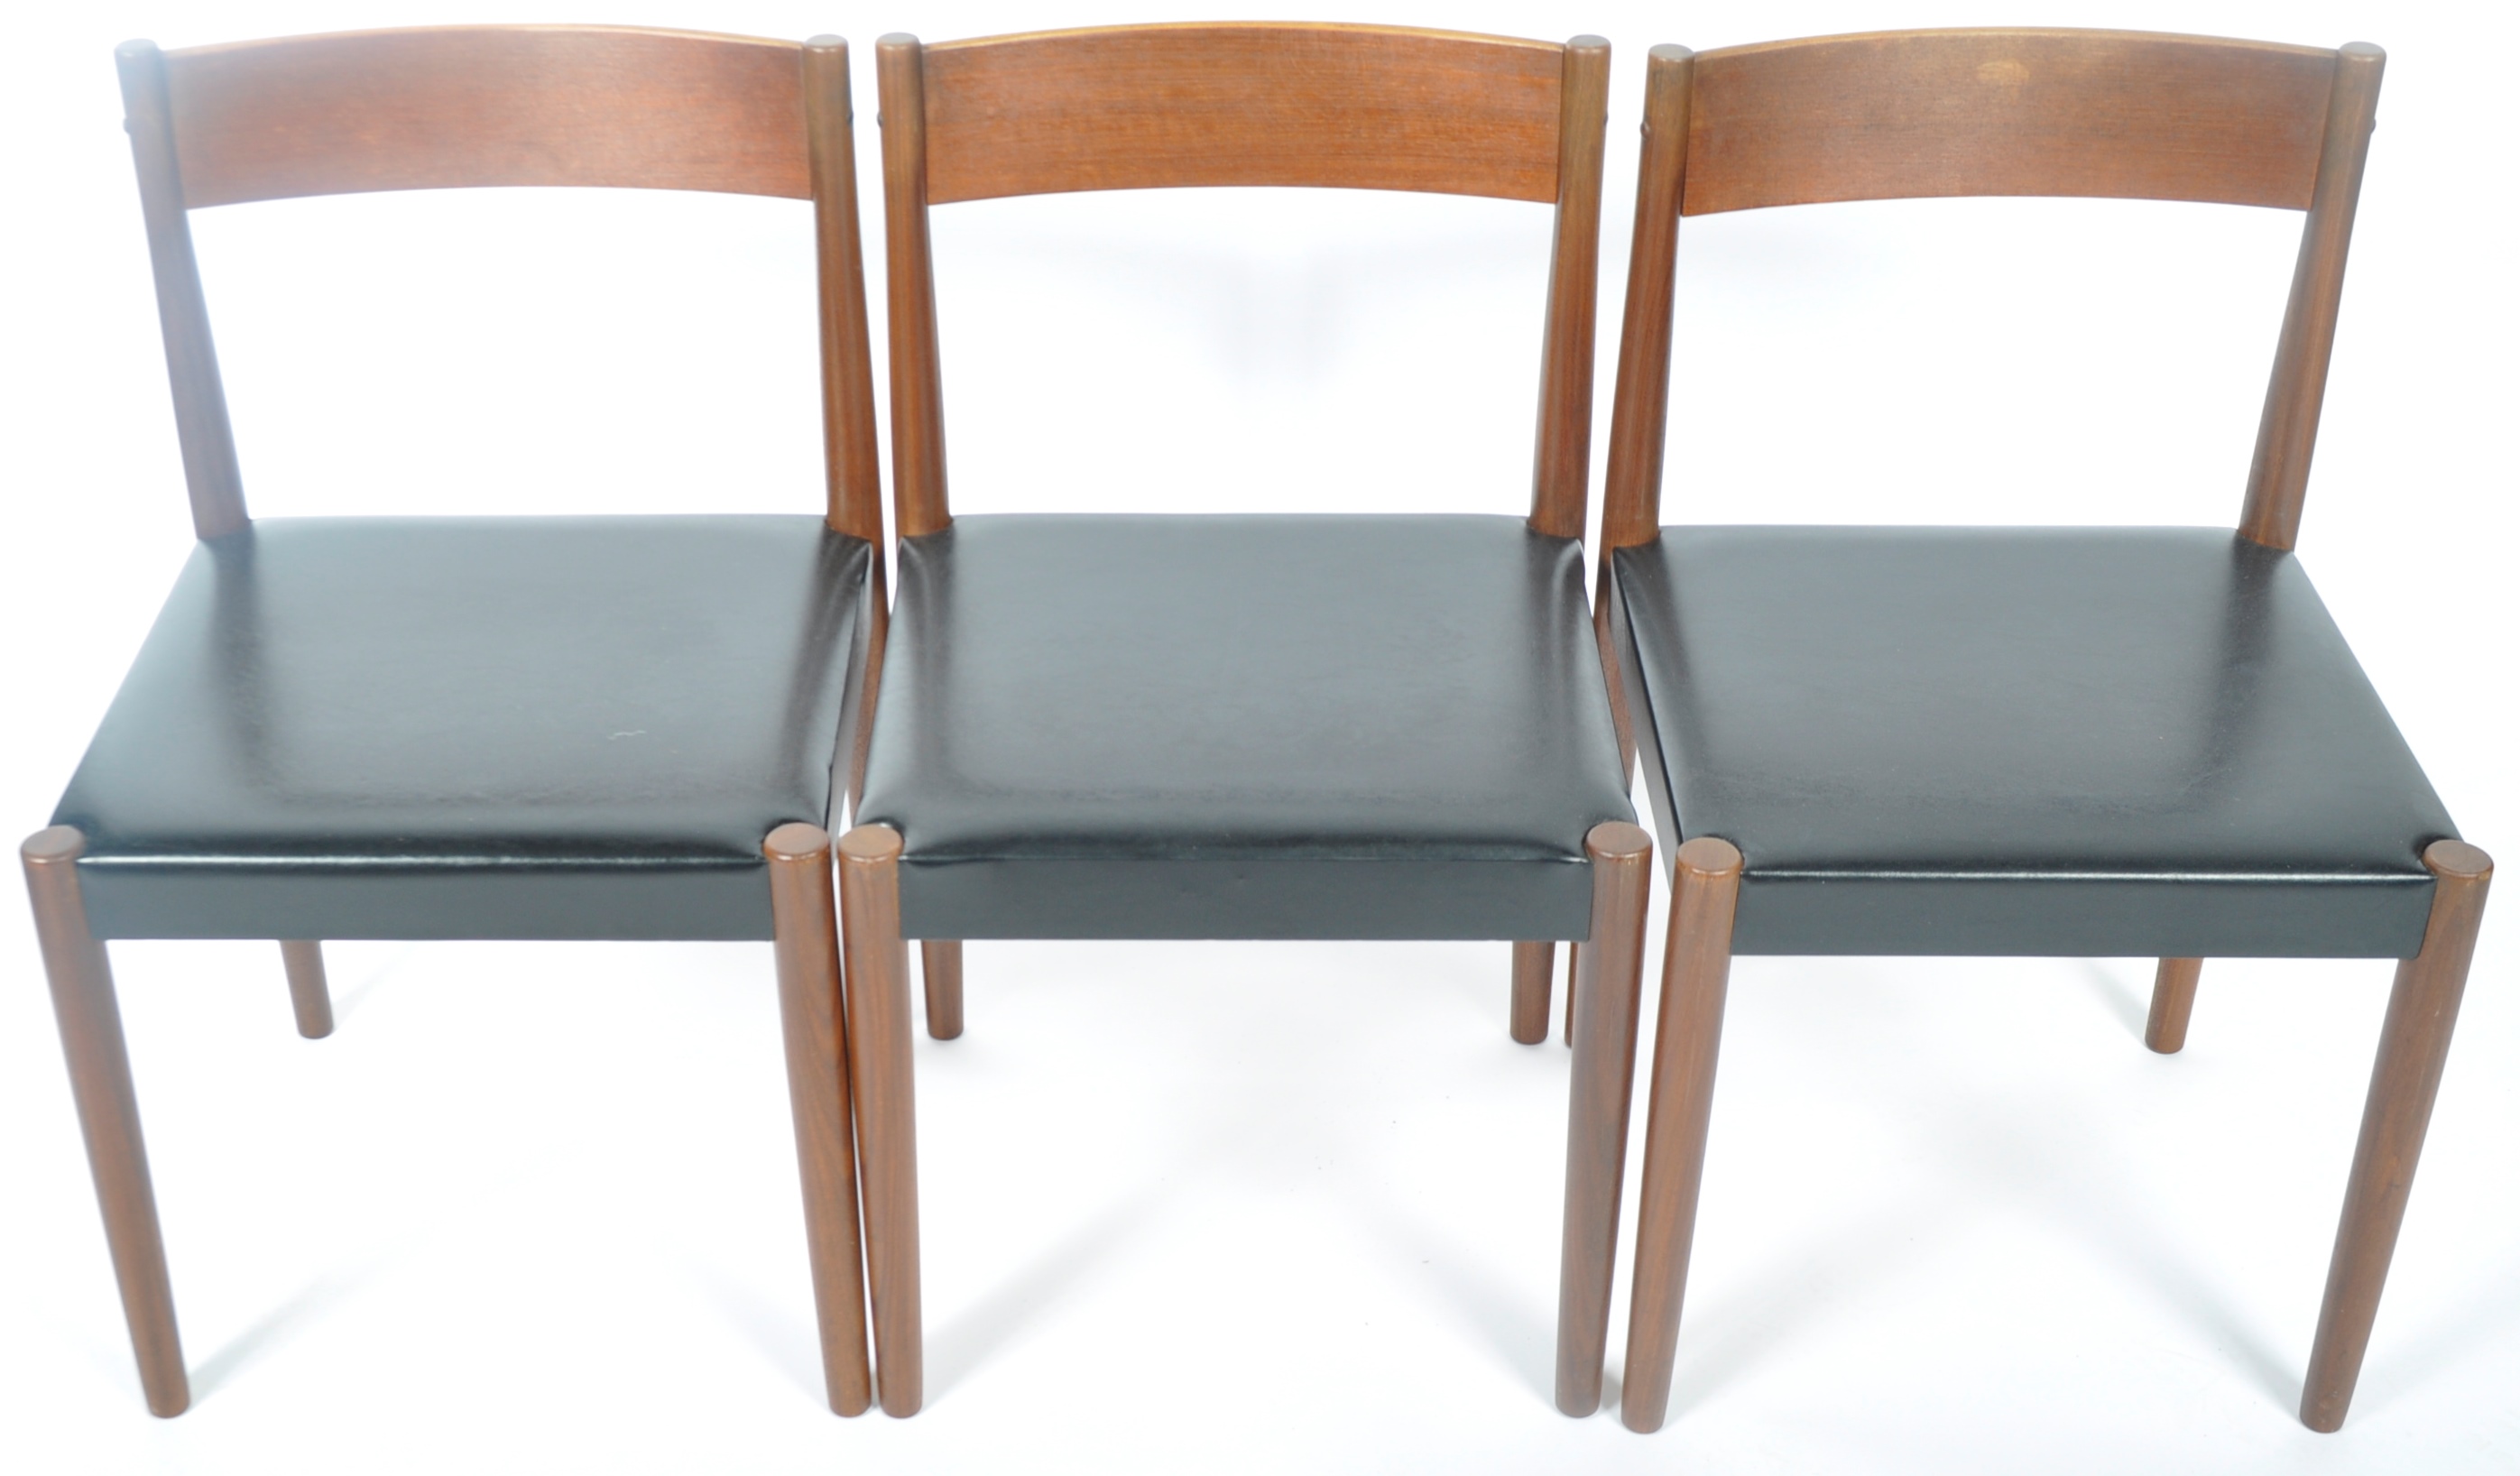 POUL VOLTHER FOR FREM ROJLE MATCHING SET OF SIX CHAIRS - Image 3 of 7